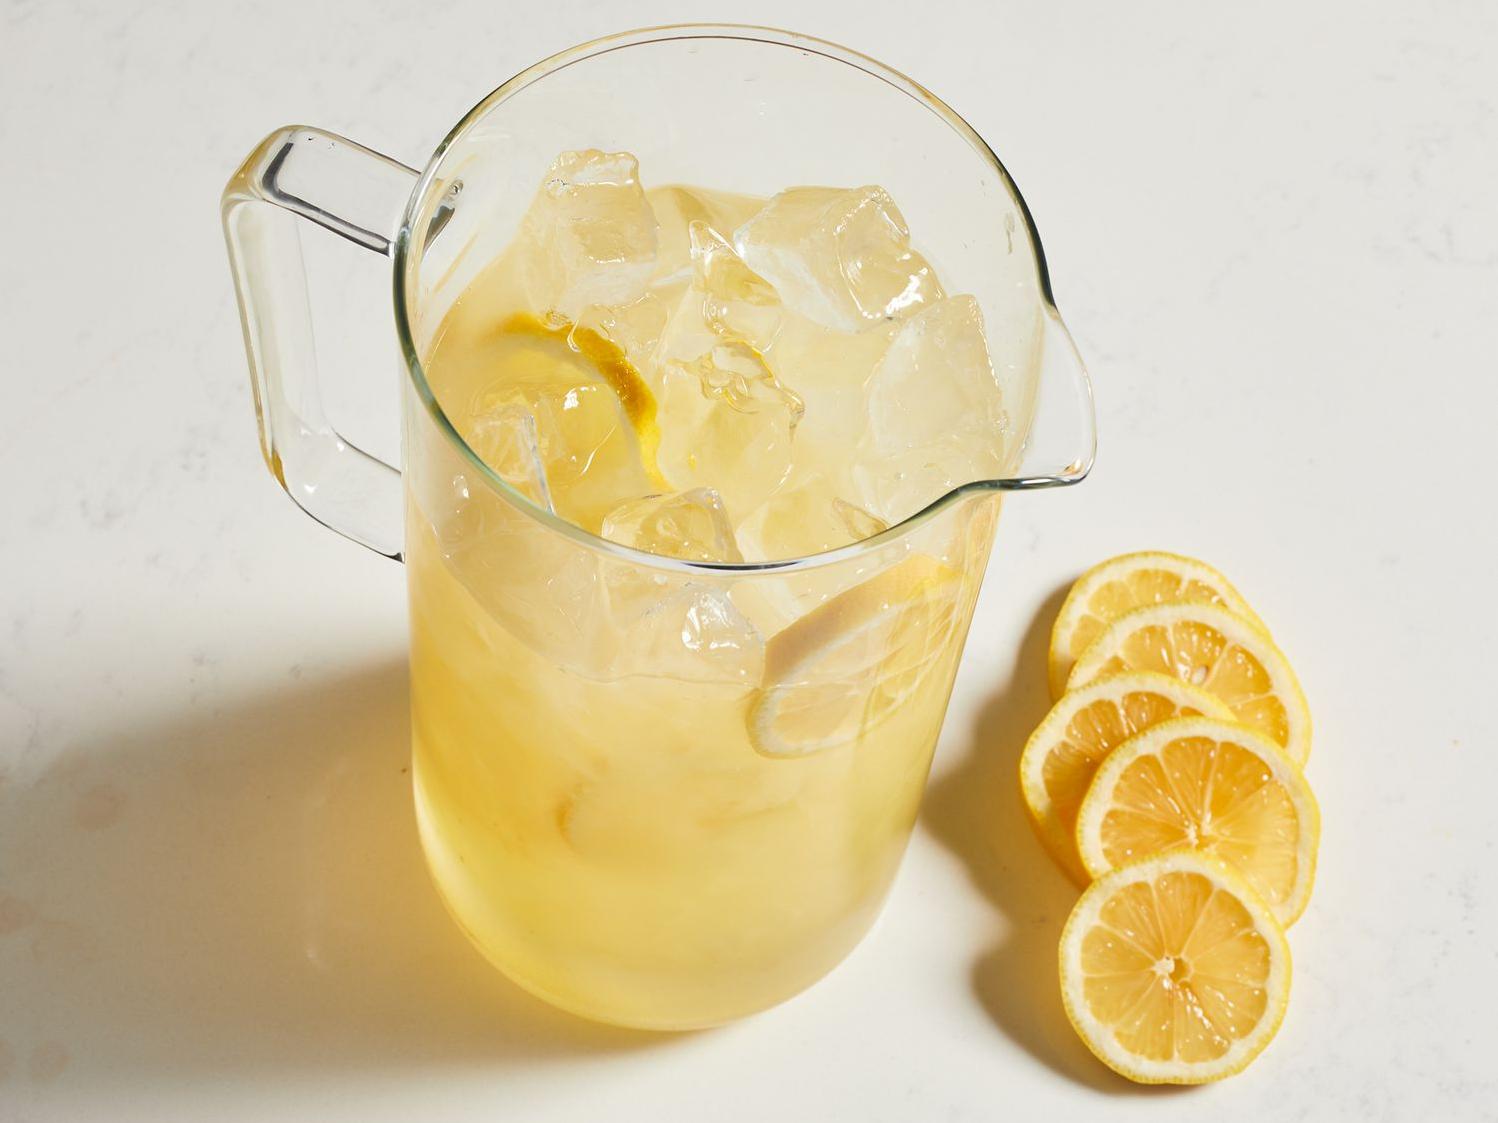  Sip on this refreshing experience with a Southern twist!